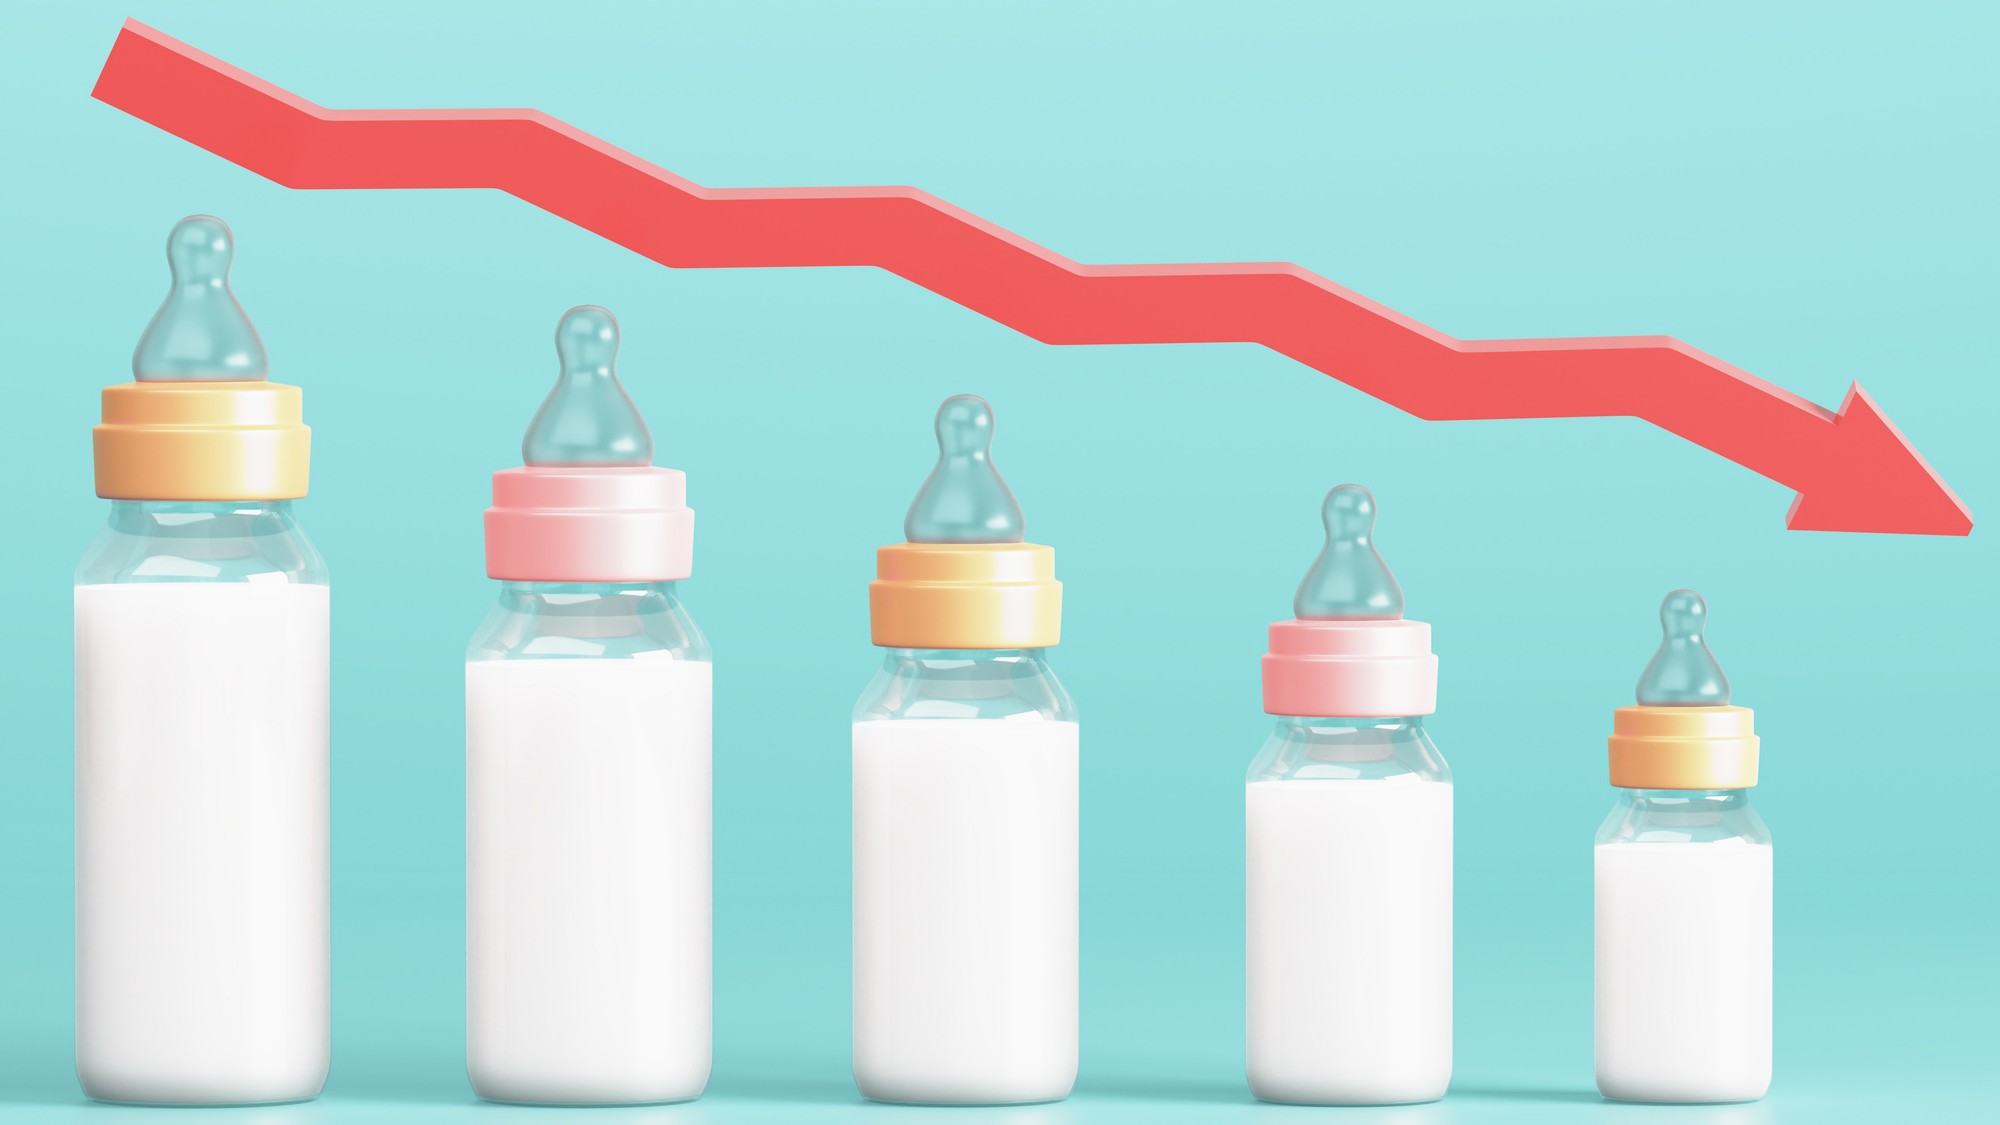  Why does the US fertility rate keep dropping? 